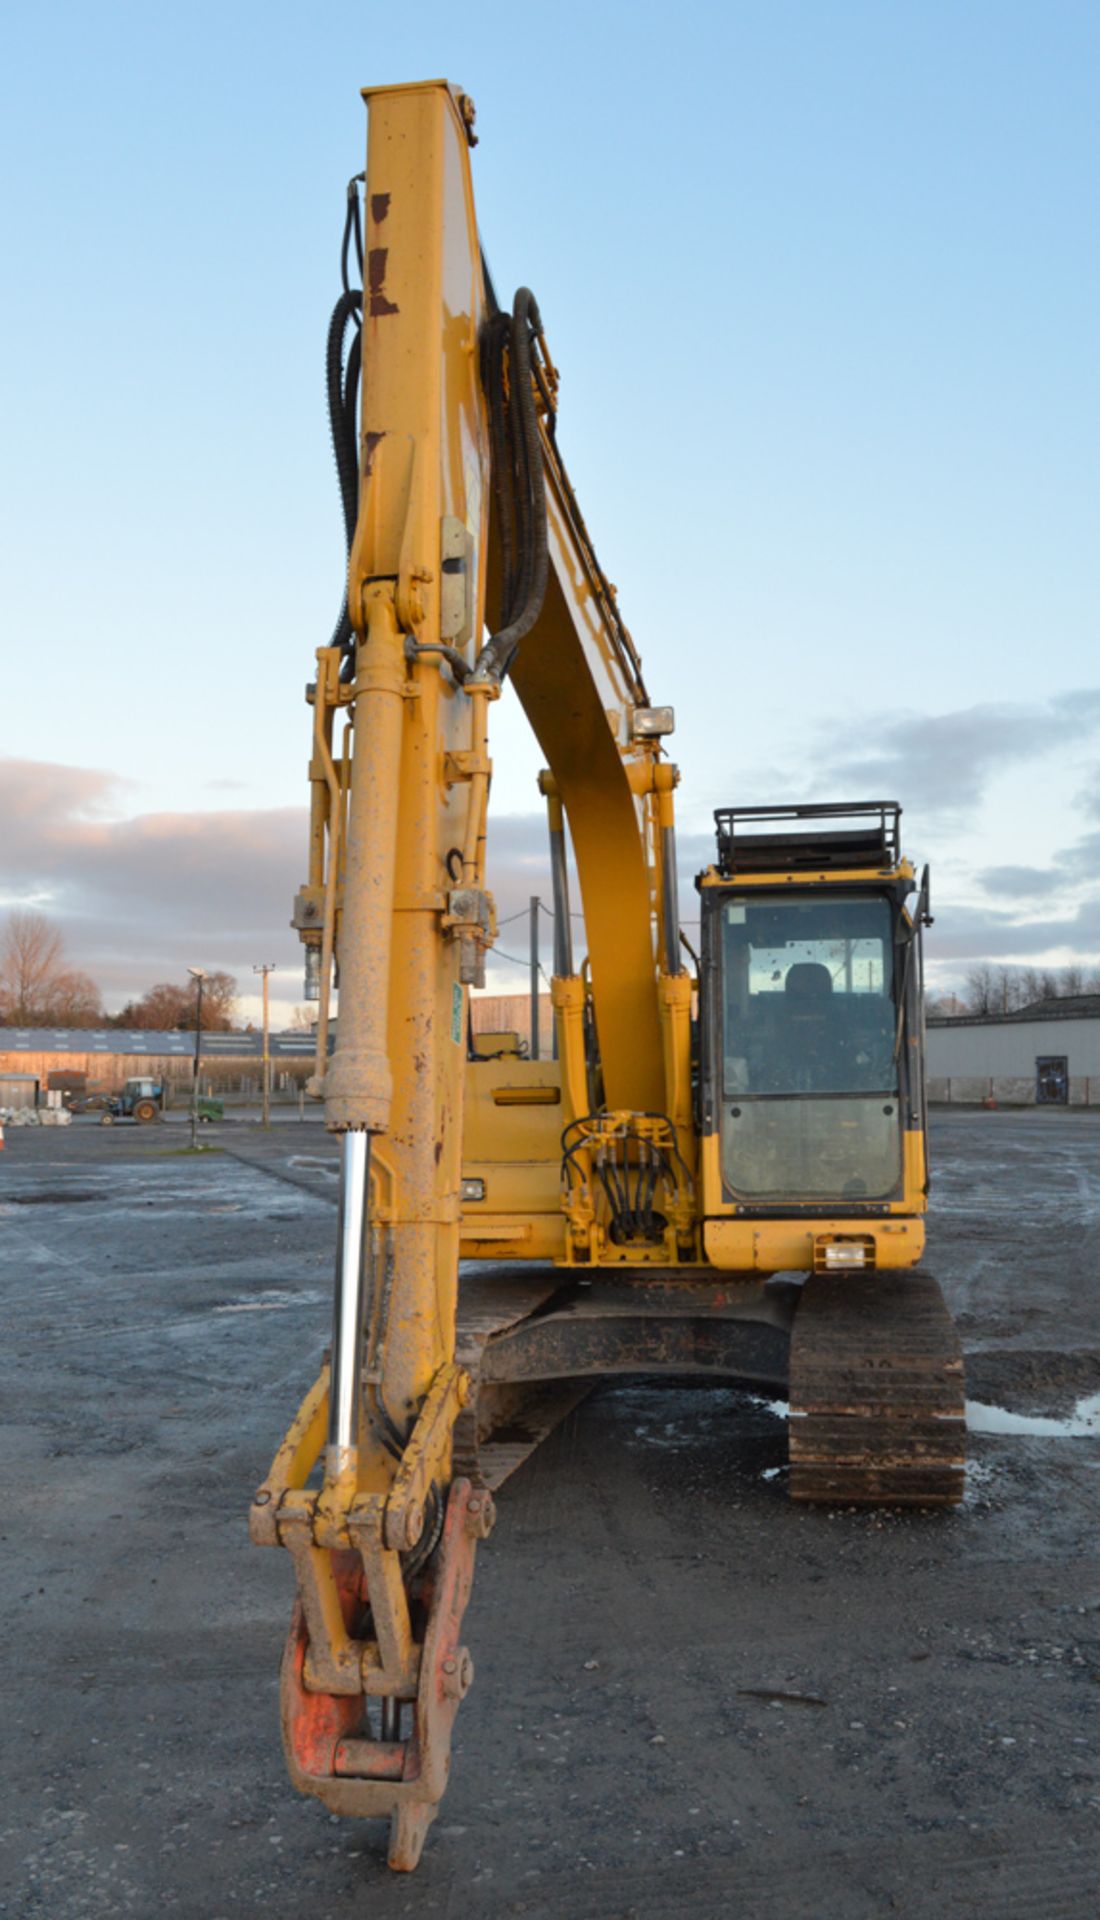 Komatsu PC130-8 13 tonne steel tracked excavator Year: 2010 S/N: C30113 Recorded Hours: 5998 1 - Image 5 of 13